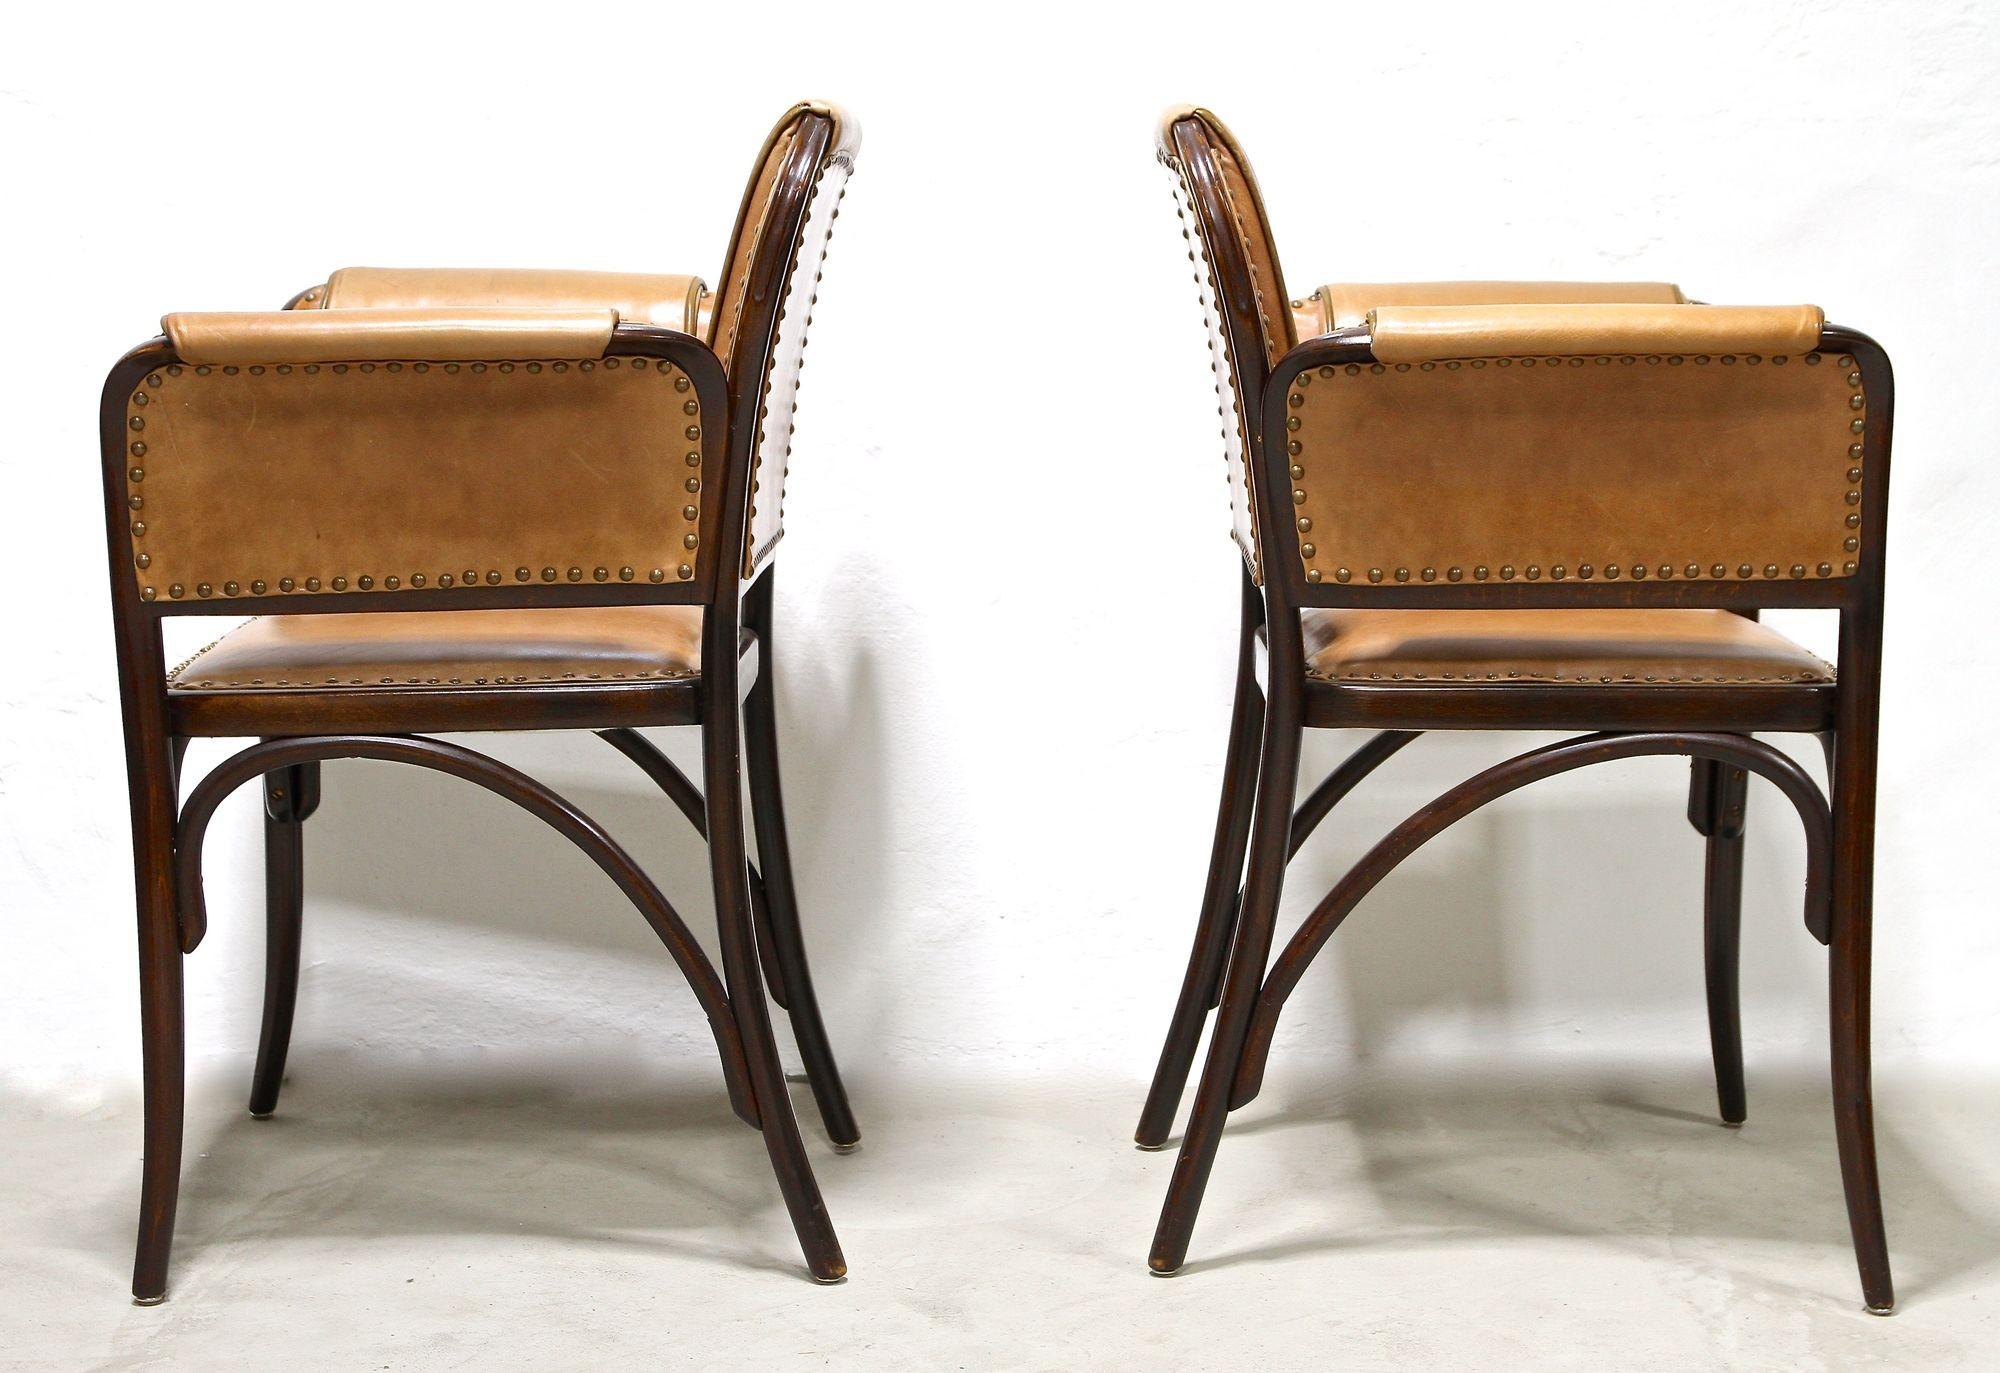 Pair of 20th Century Art Nouveau Bentwood Armchairs by Thonet, Austria, Ca. 1904 For Sale 1